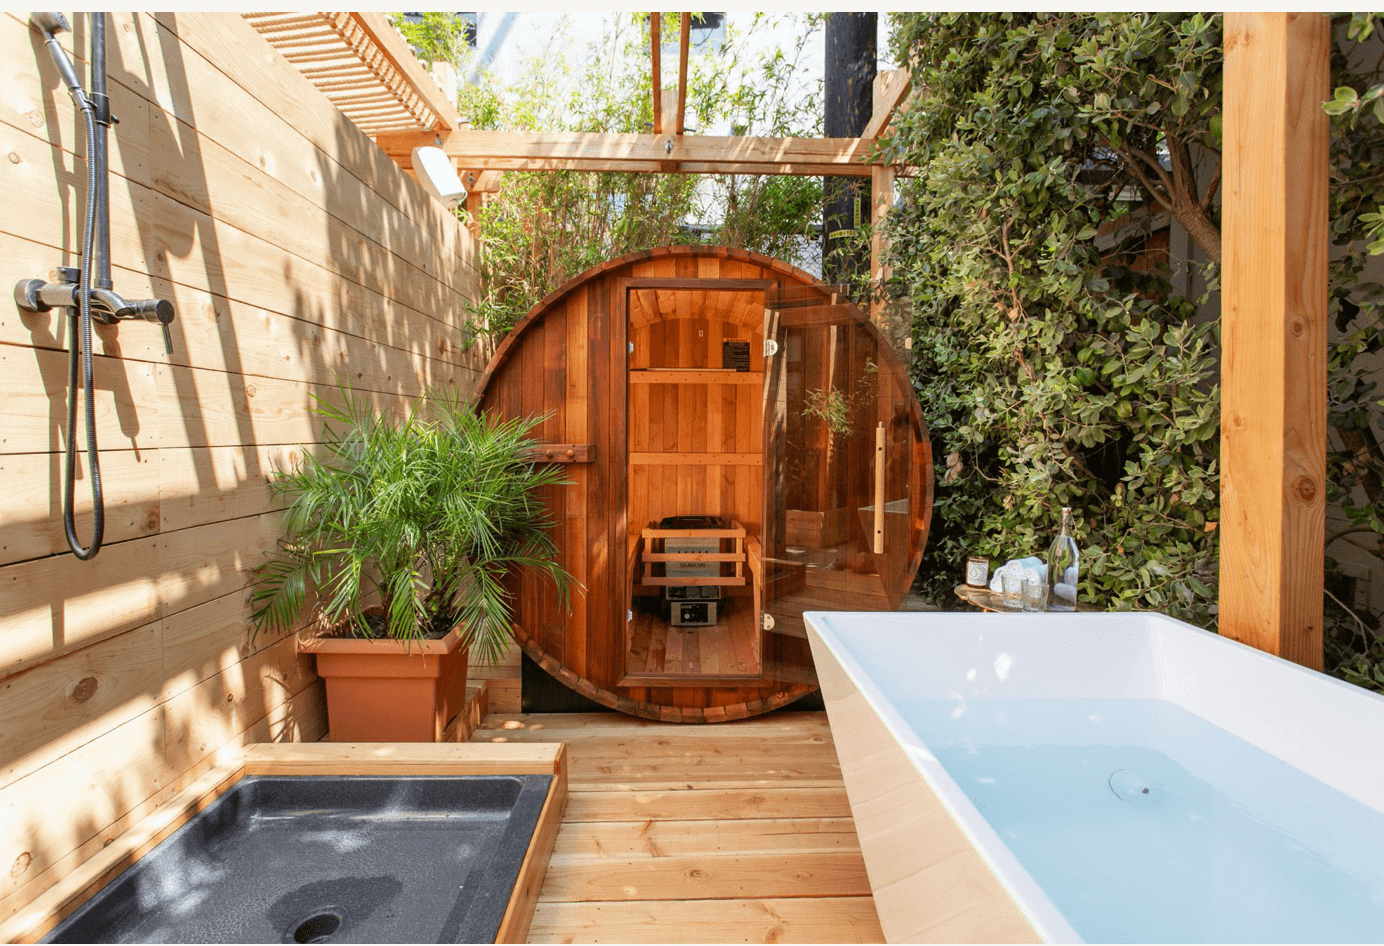 A wooden barrel sauna and outdoor bathtub with greenery